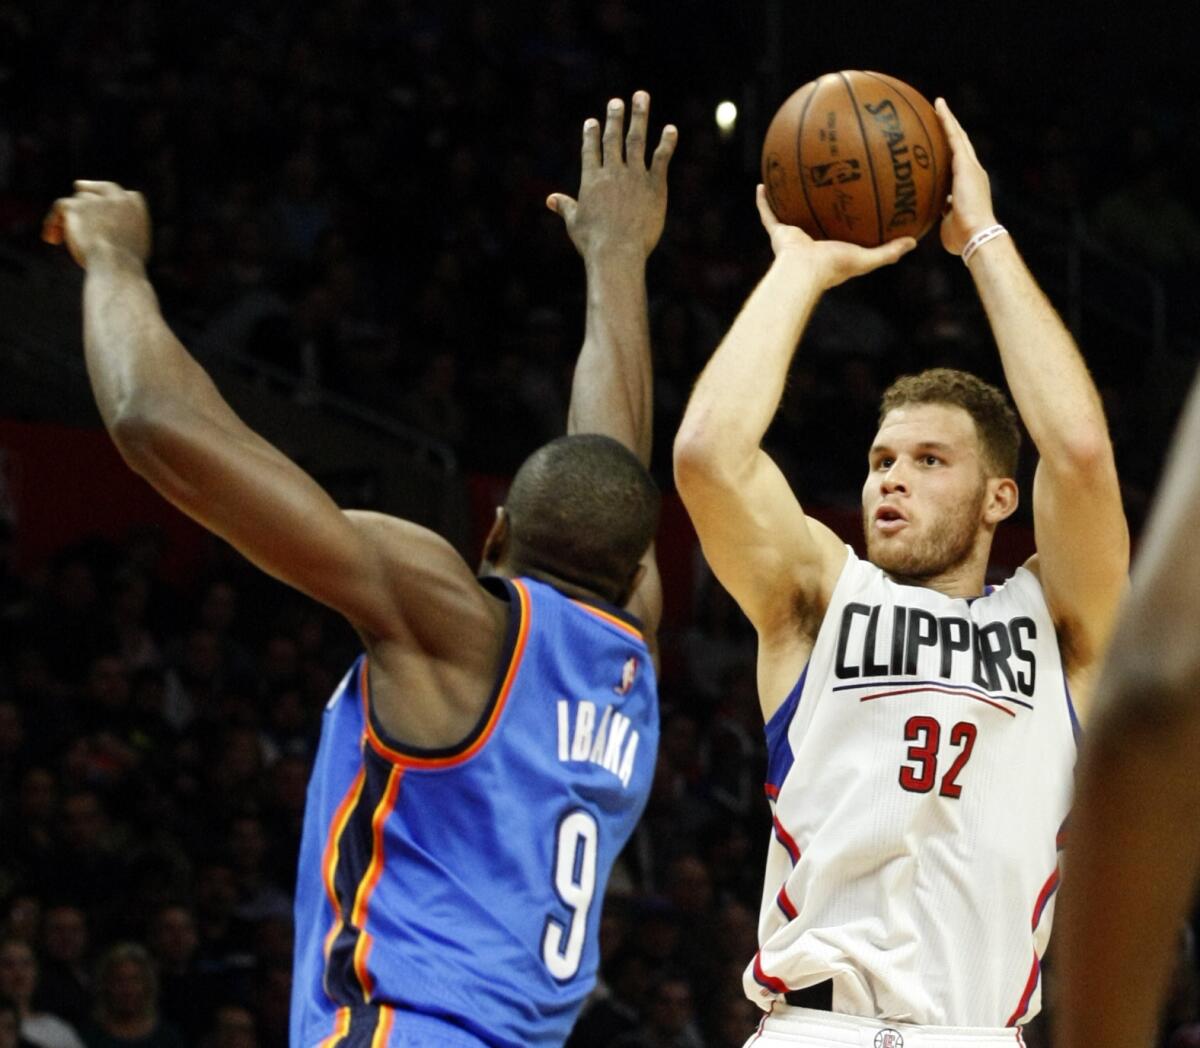 Blake Griffin takes a shot over the outstretched arm of Oklahoma City's Serge Ibaka on Dec. 21.